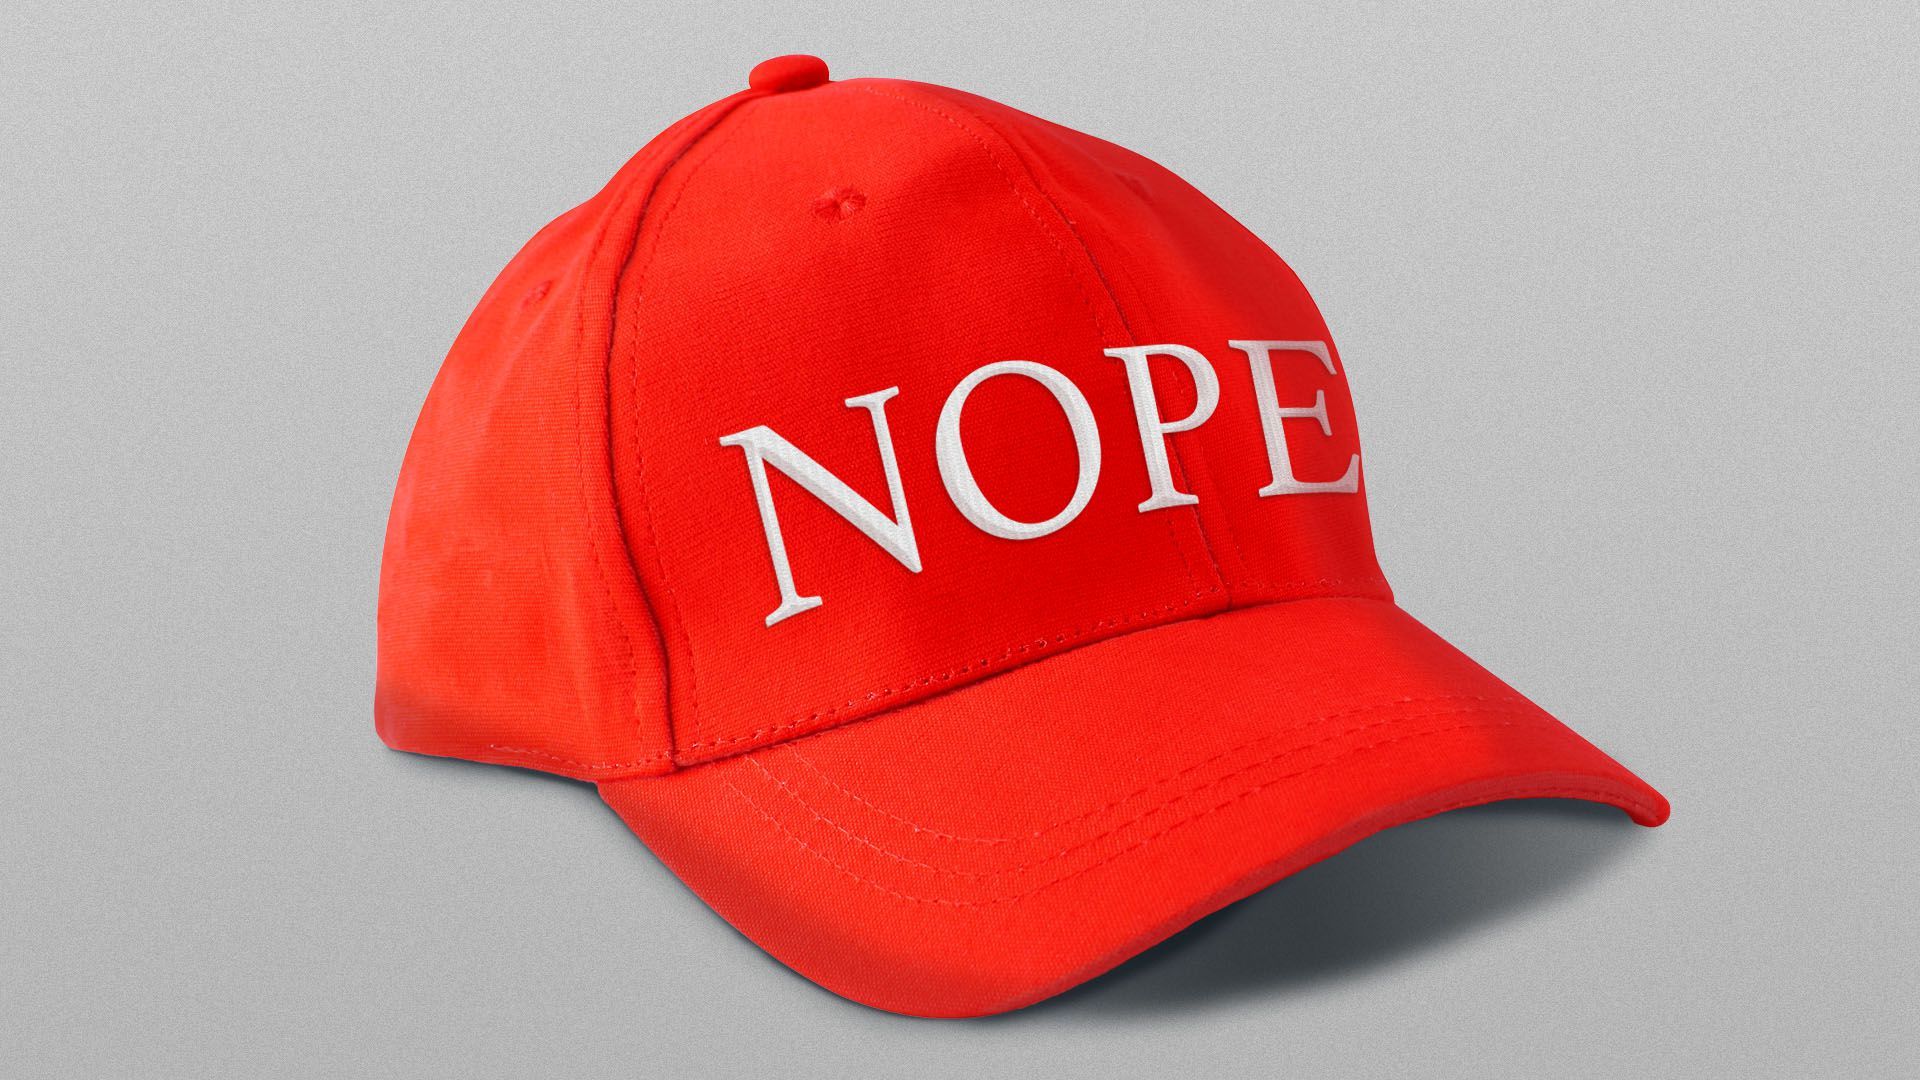 Illustration of a red Maga-like baseball cap that reads "nope"